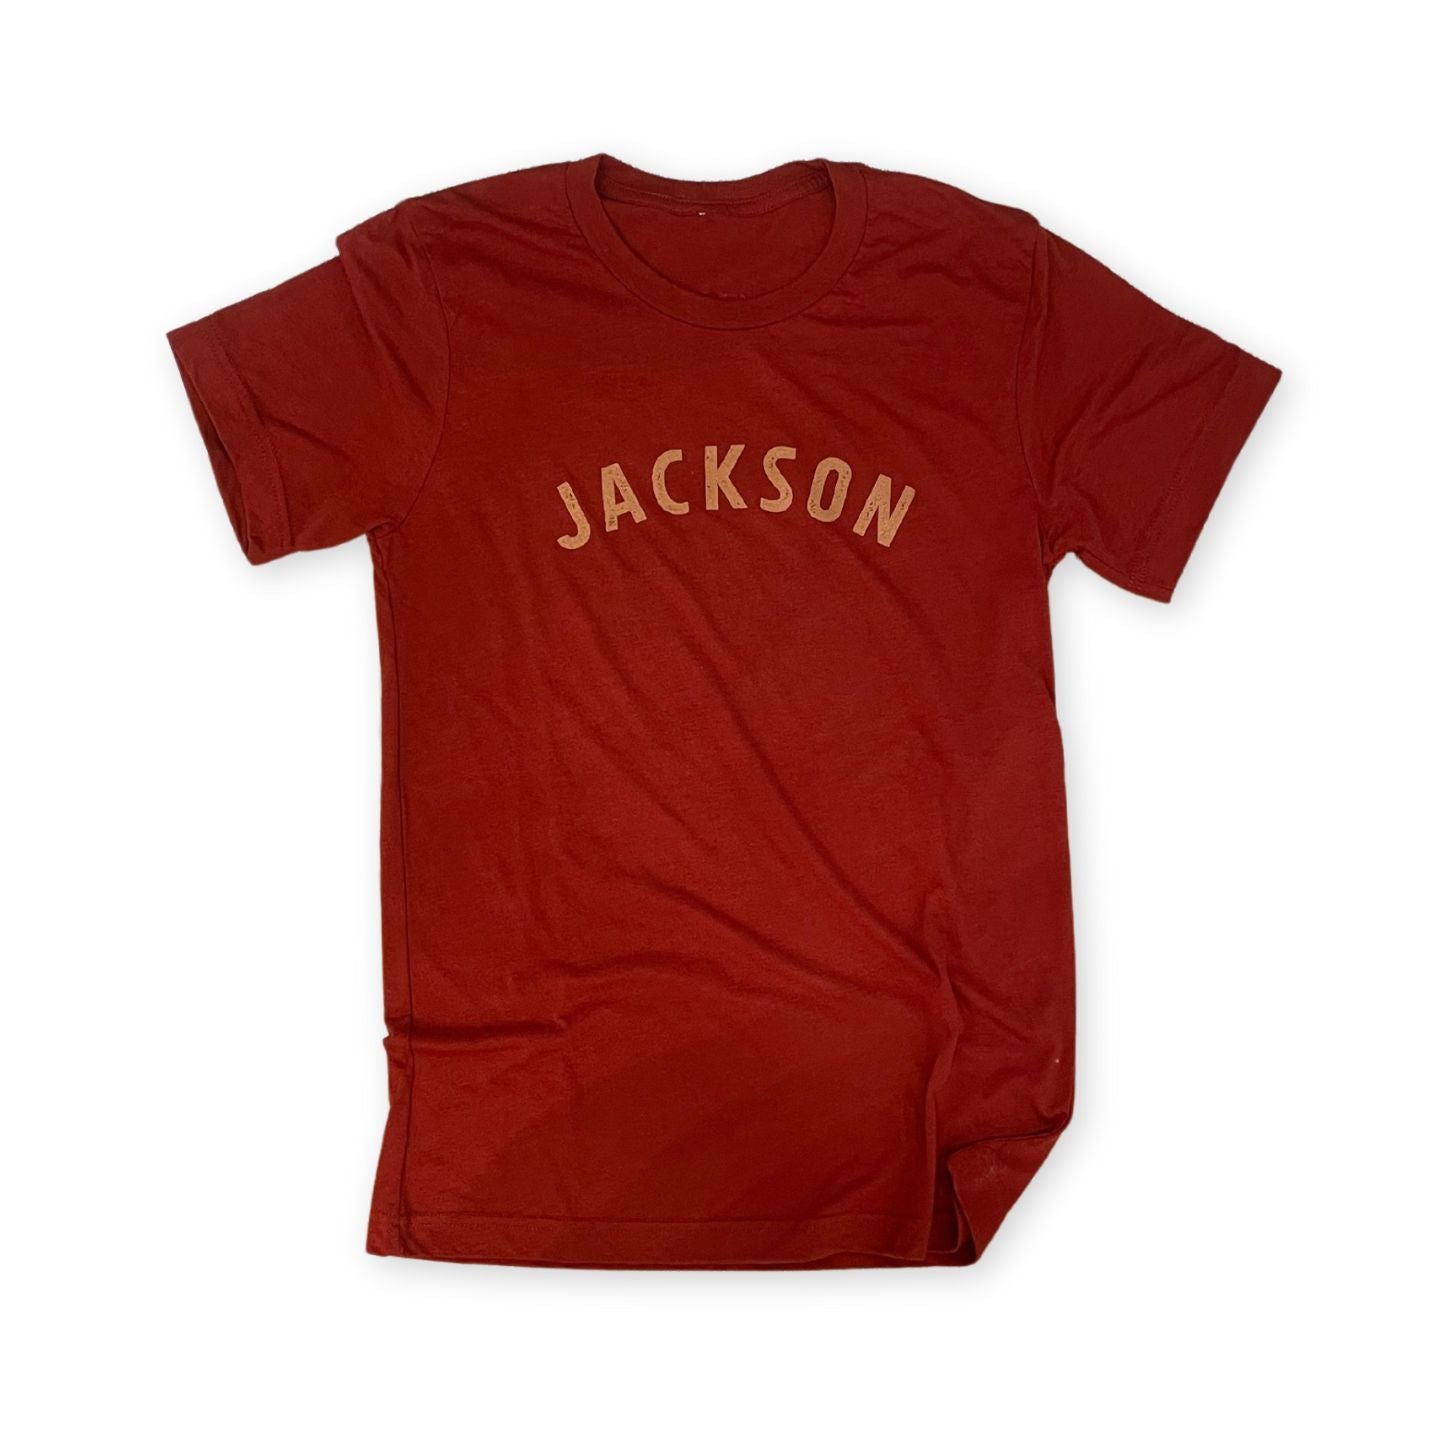 classic jackson shirt in rust with a faded typeface logo